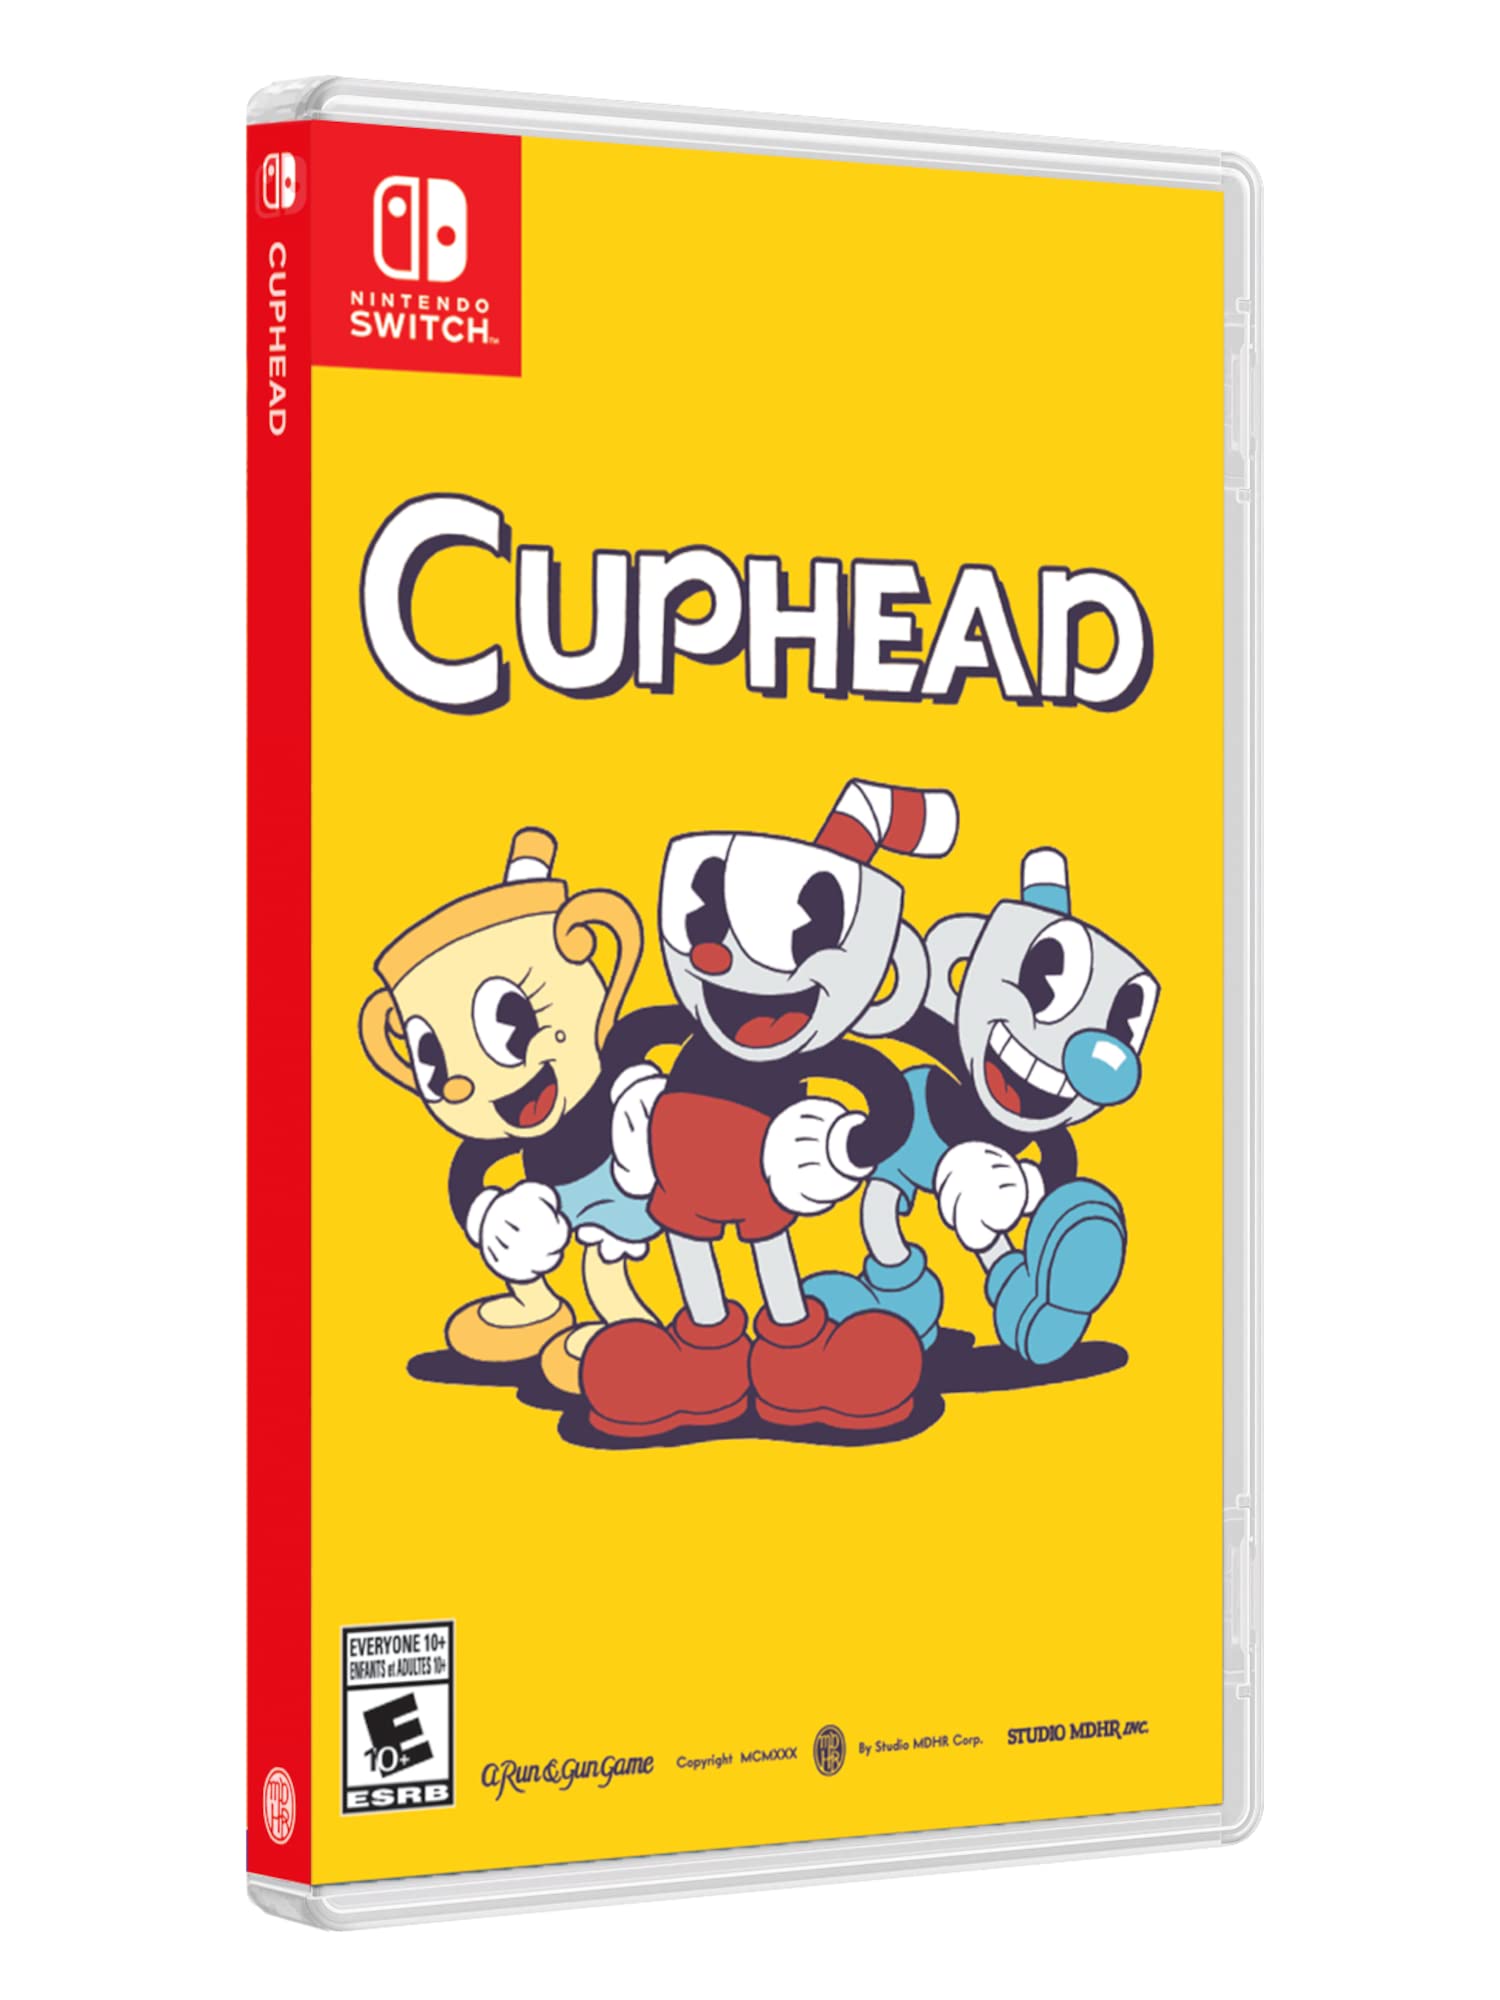 Cuphead Nintendo Switch Game (Physical) $30 + Free Shipping